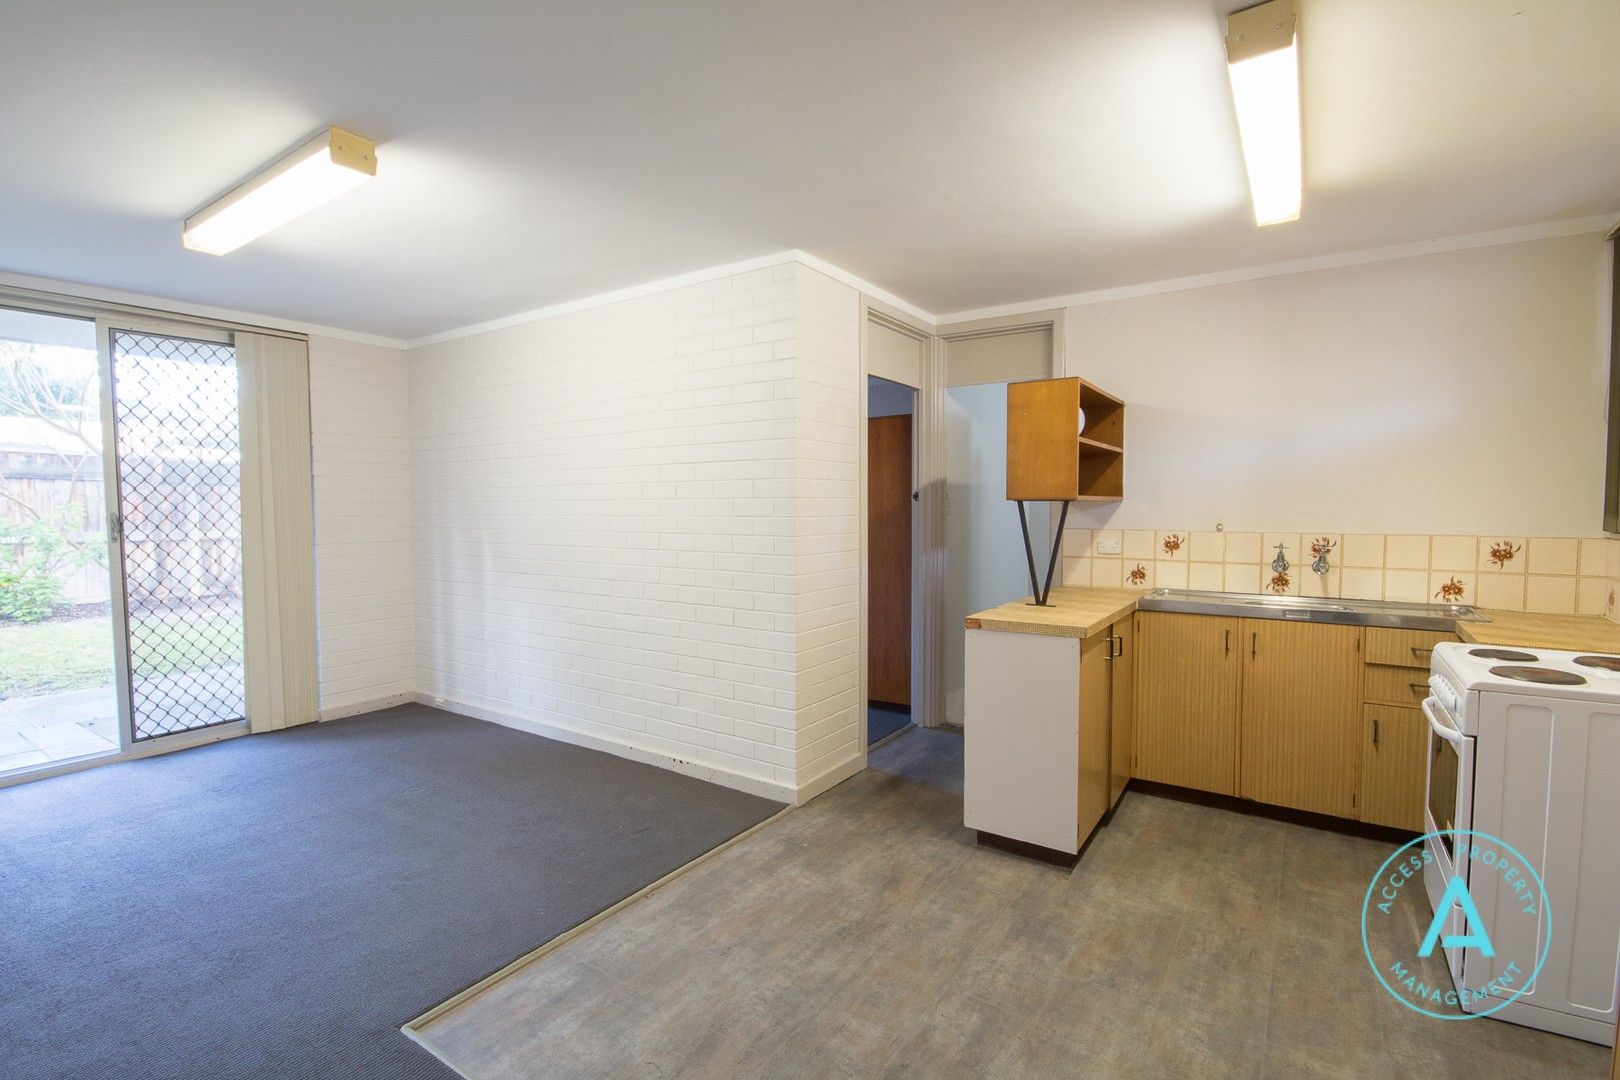 2 bedrooms Apartment / Unit / Flat in 12/128 Carr Street WEST PERTH WA, 6005